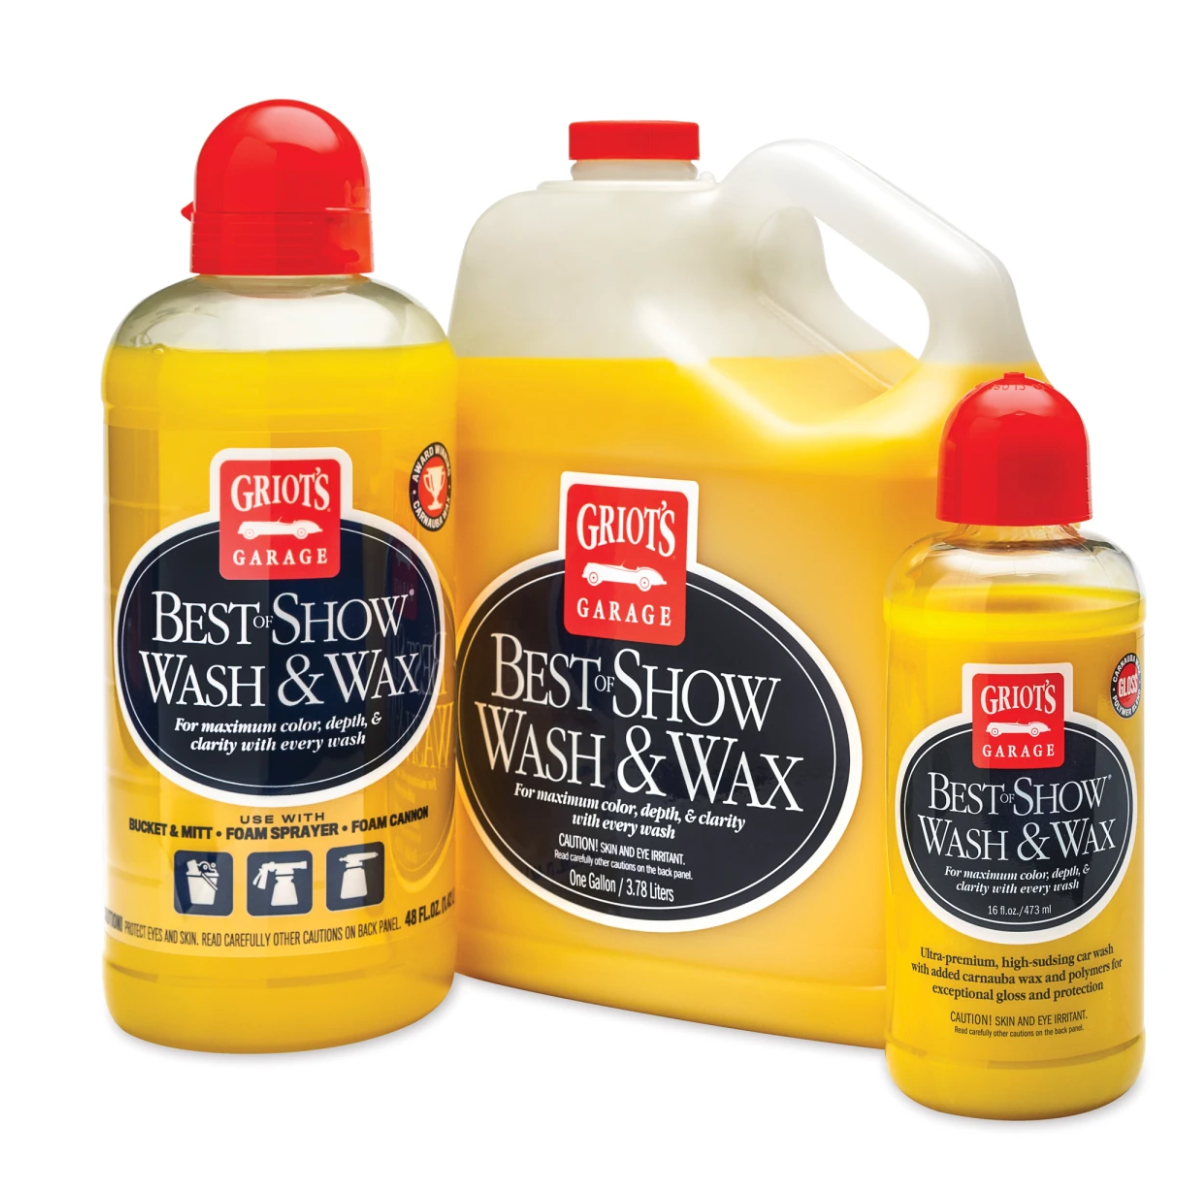 Griot's Garage Rinseless Wash & Wax Kit - with Bucket